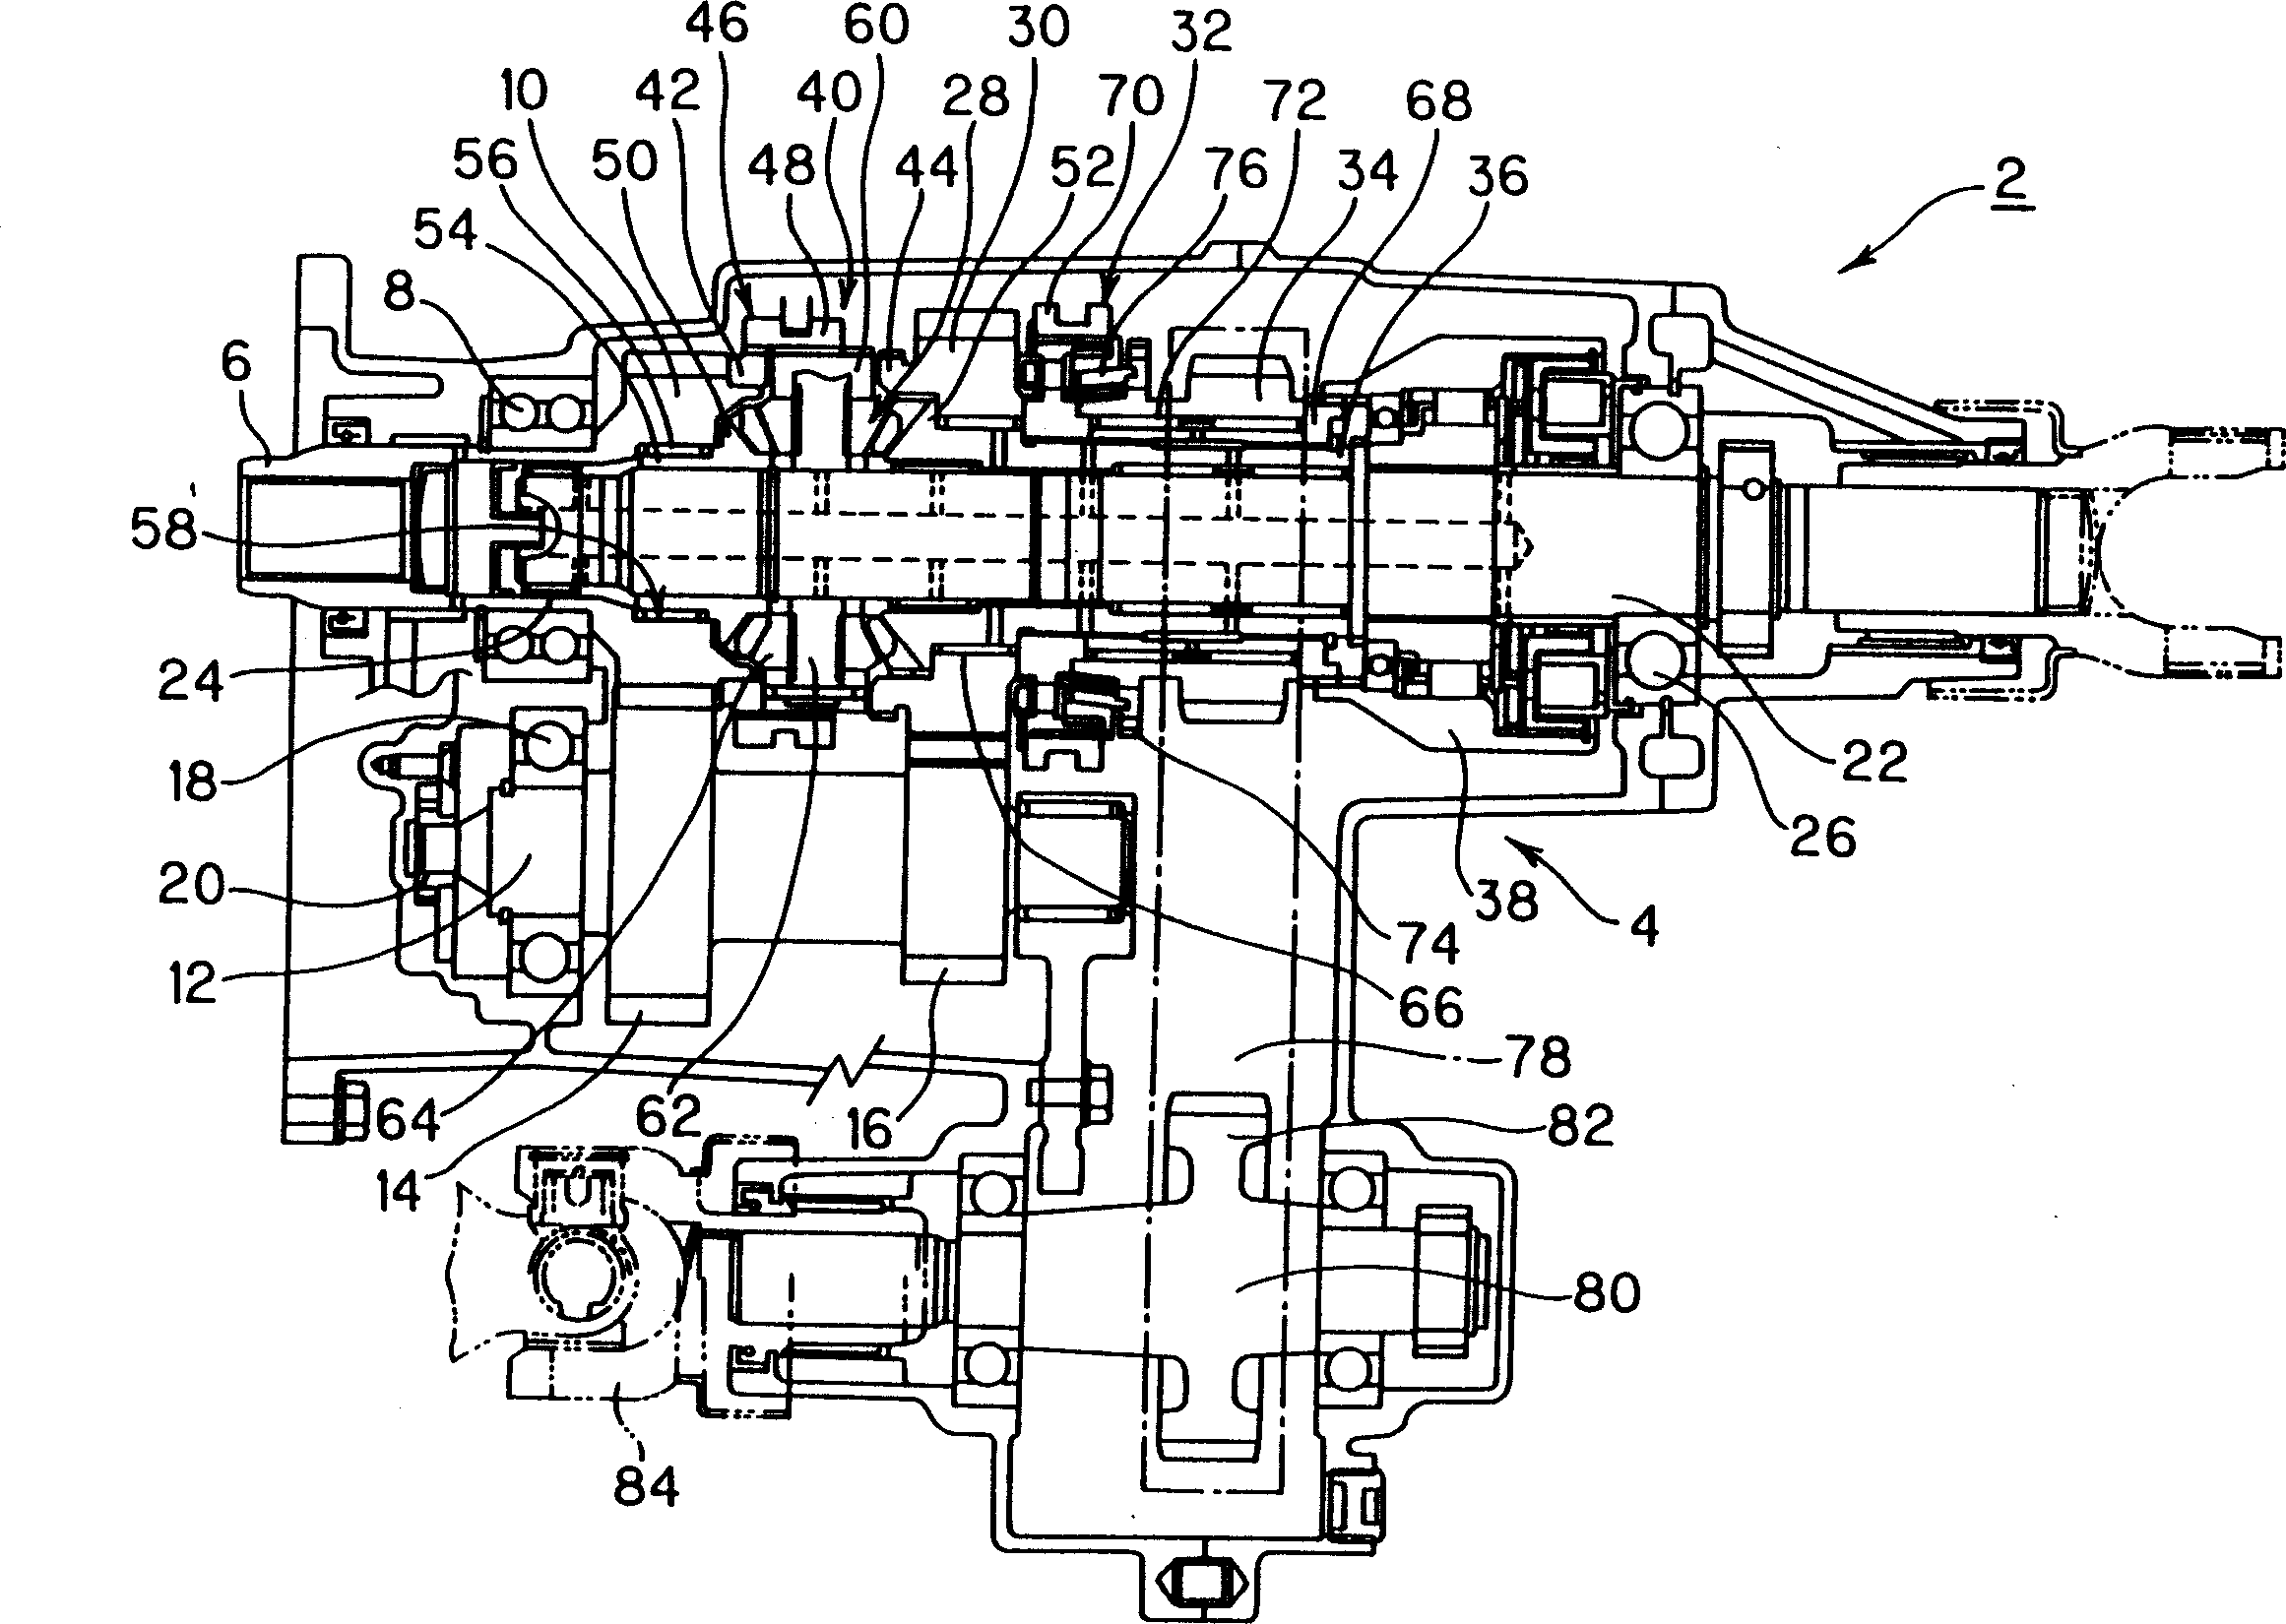 Transfer device for four-wheel driven vehicle